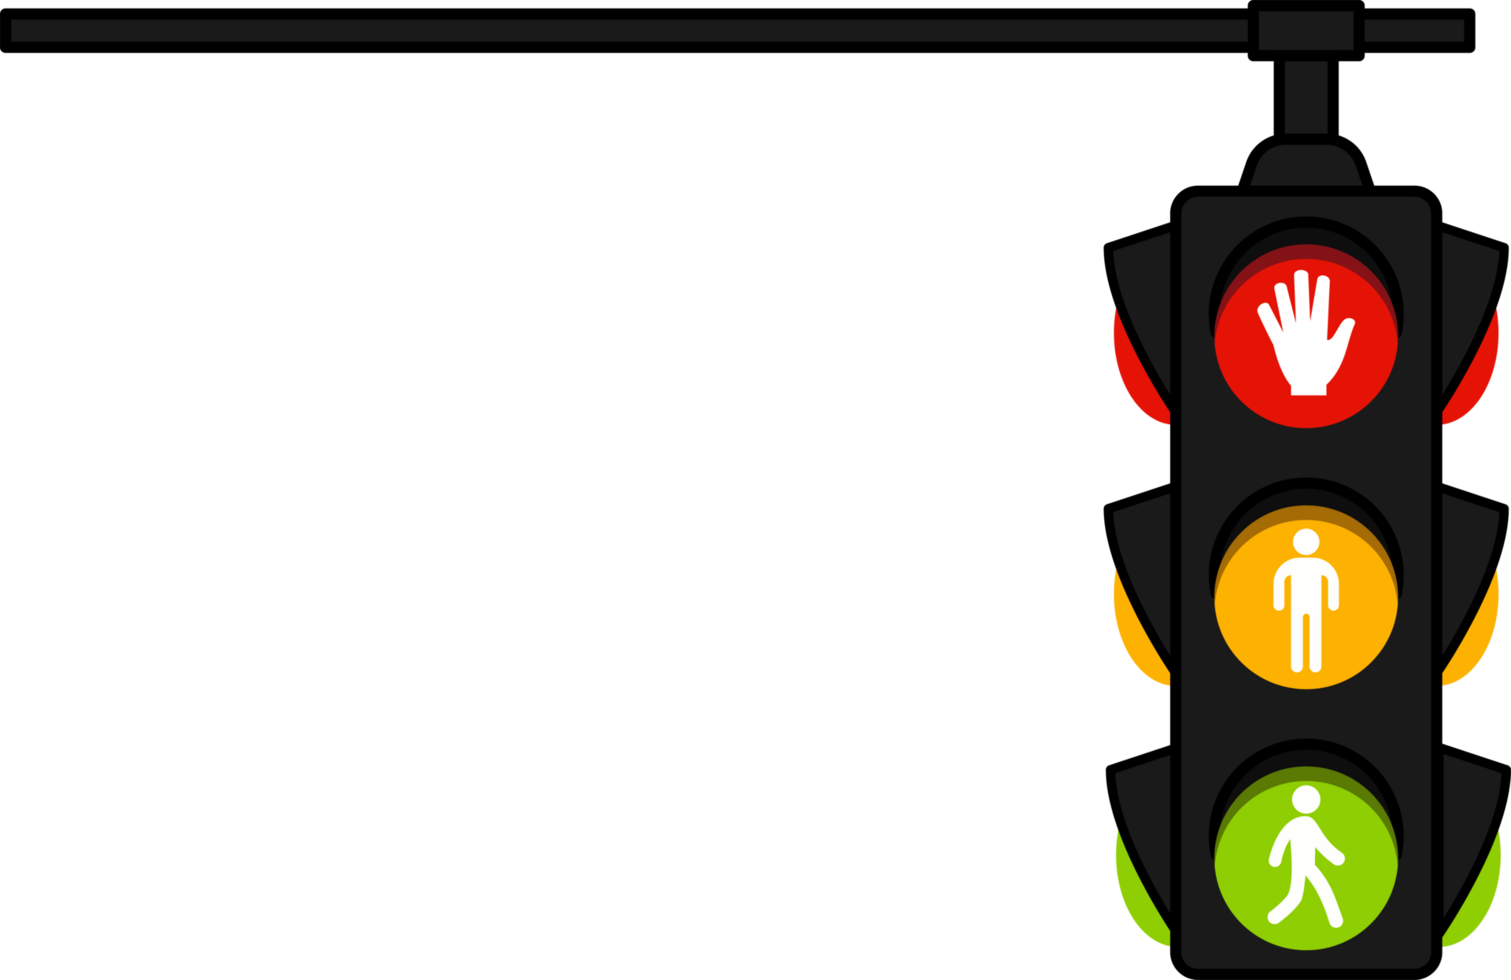 Traffic lights with all three colors or rules traffic lights png